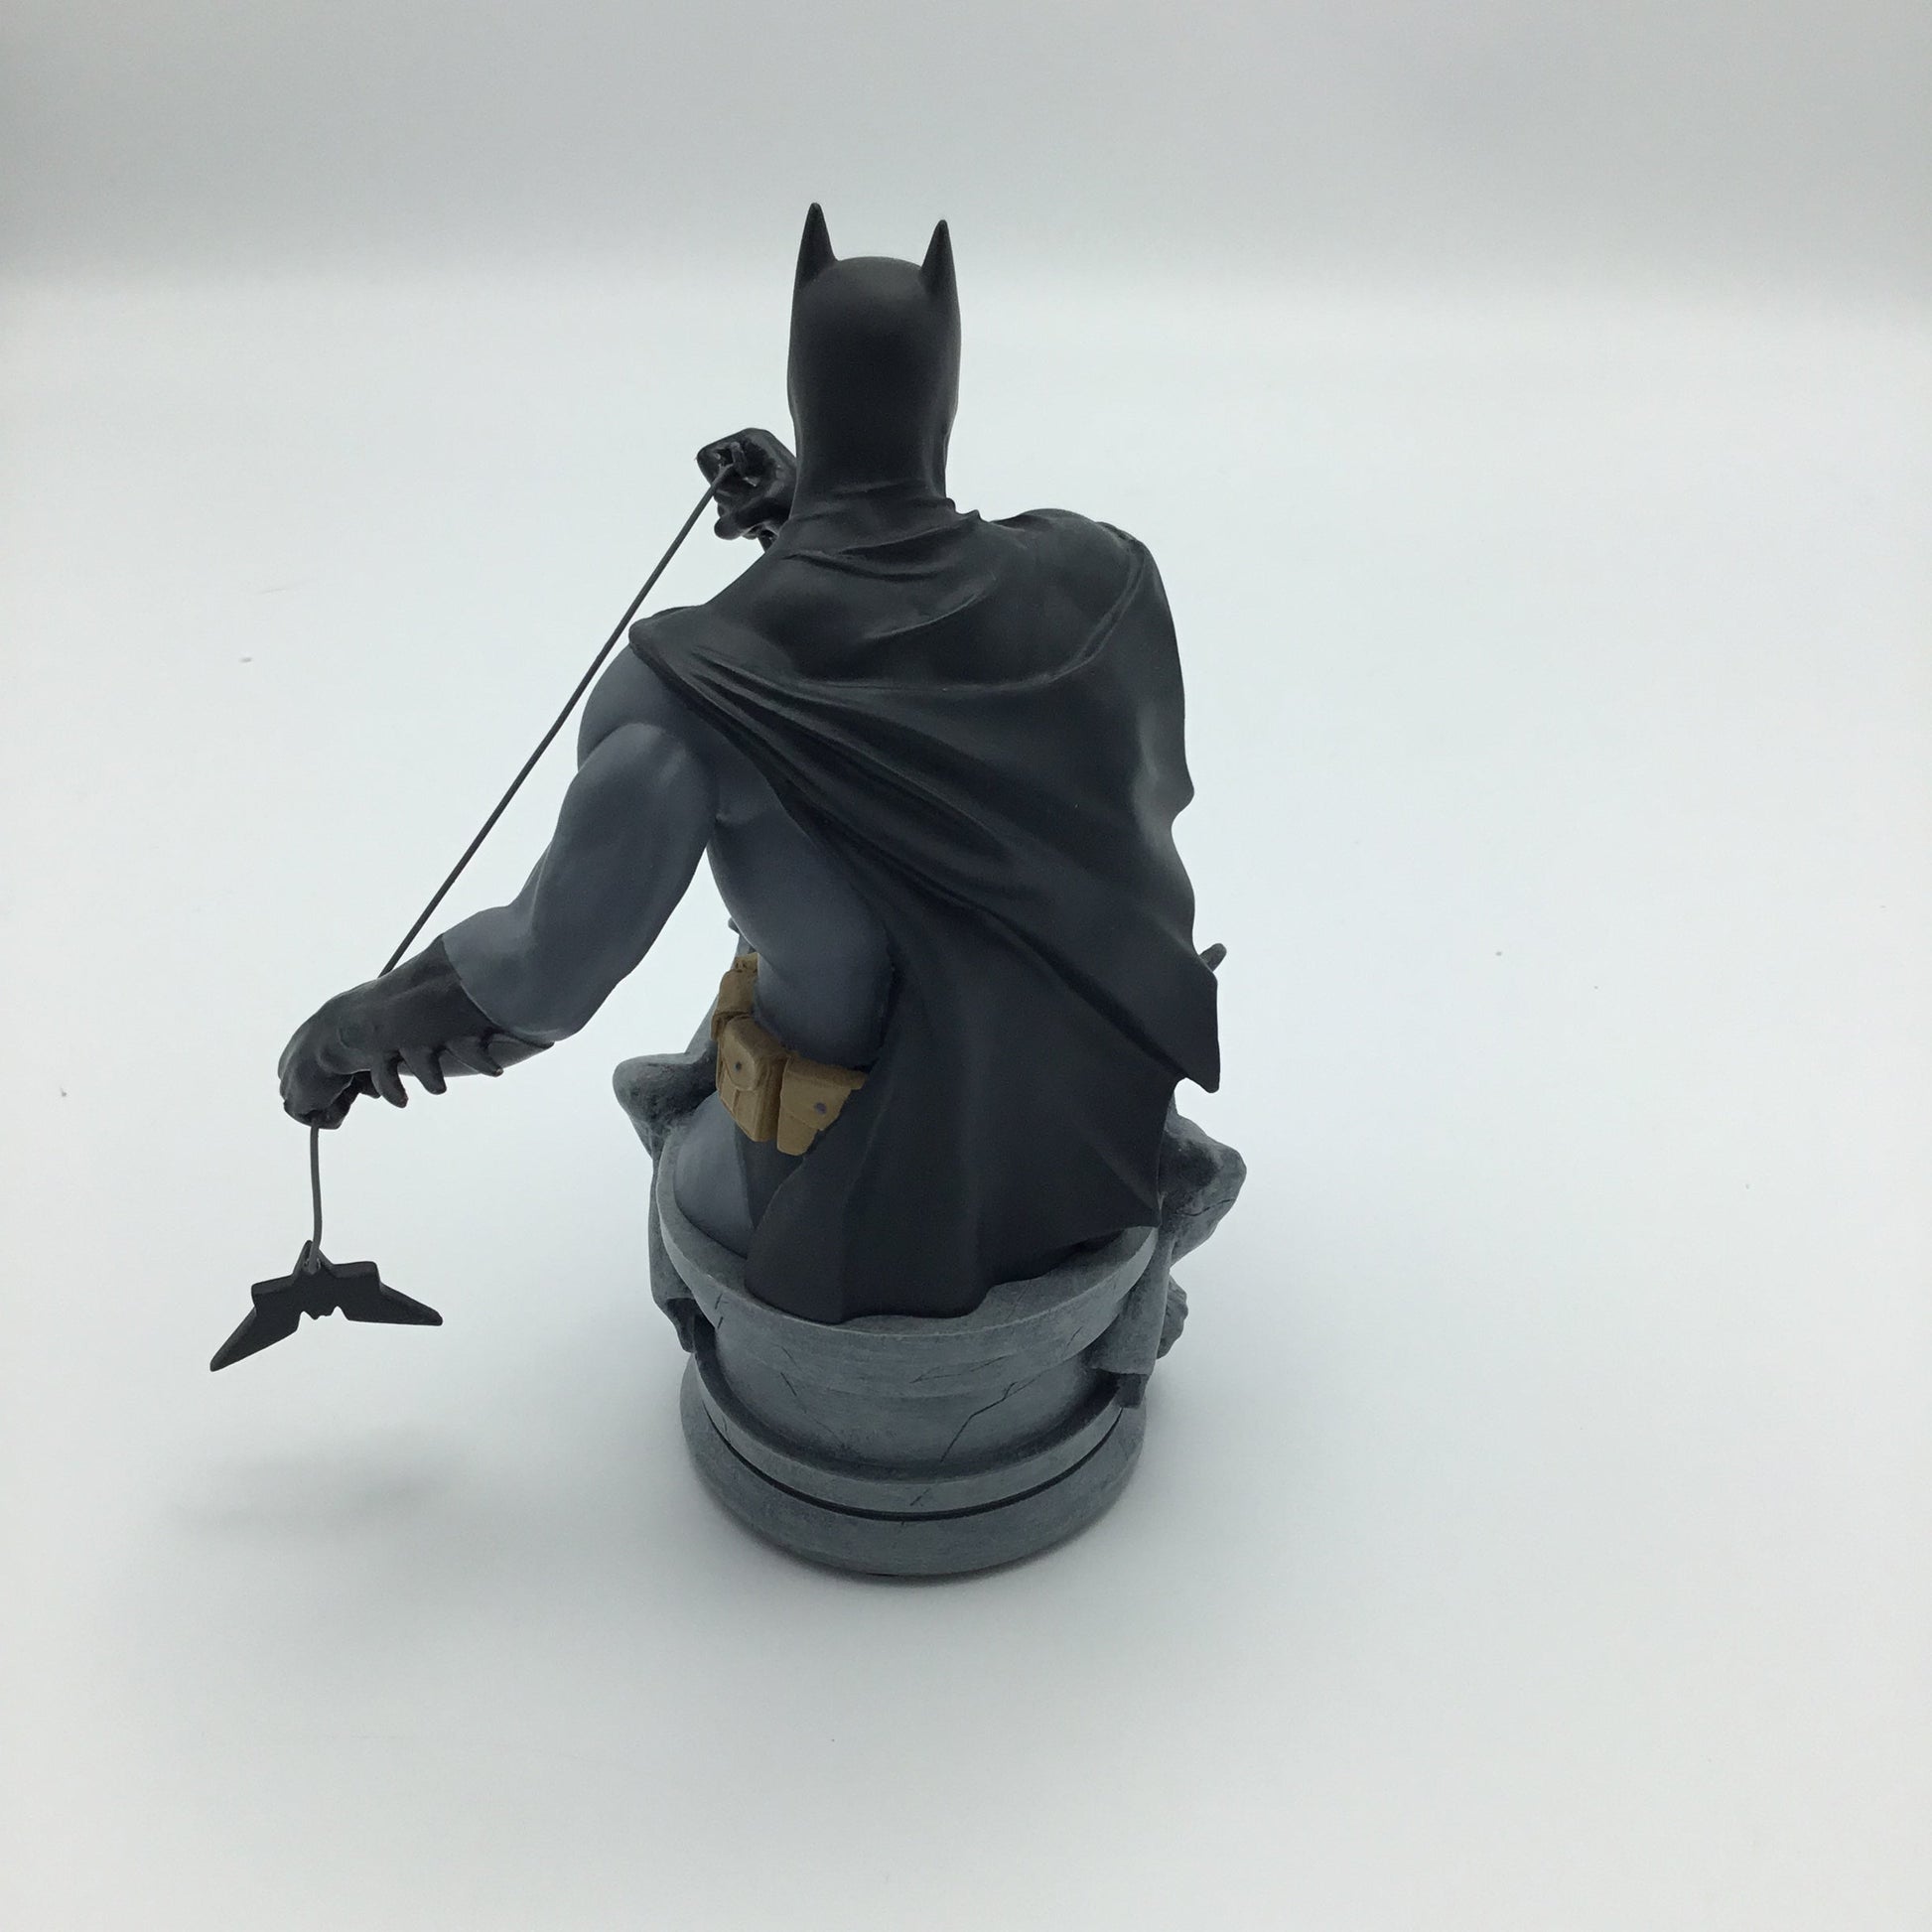 Batman: Heroes Of The DC Universe Bust - DC Direct - 2465/ 5000